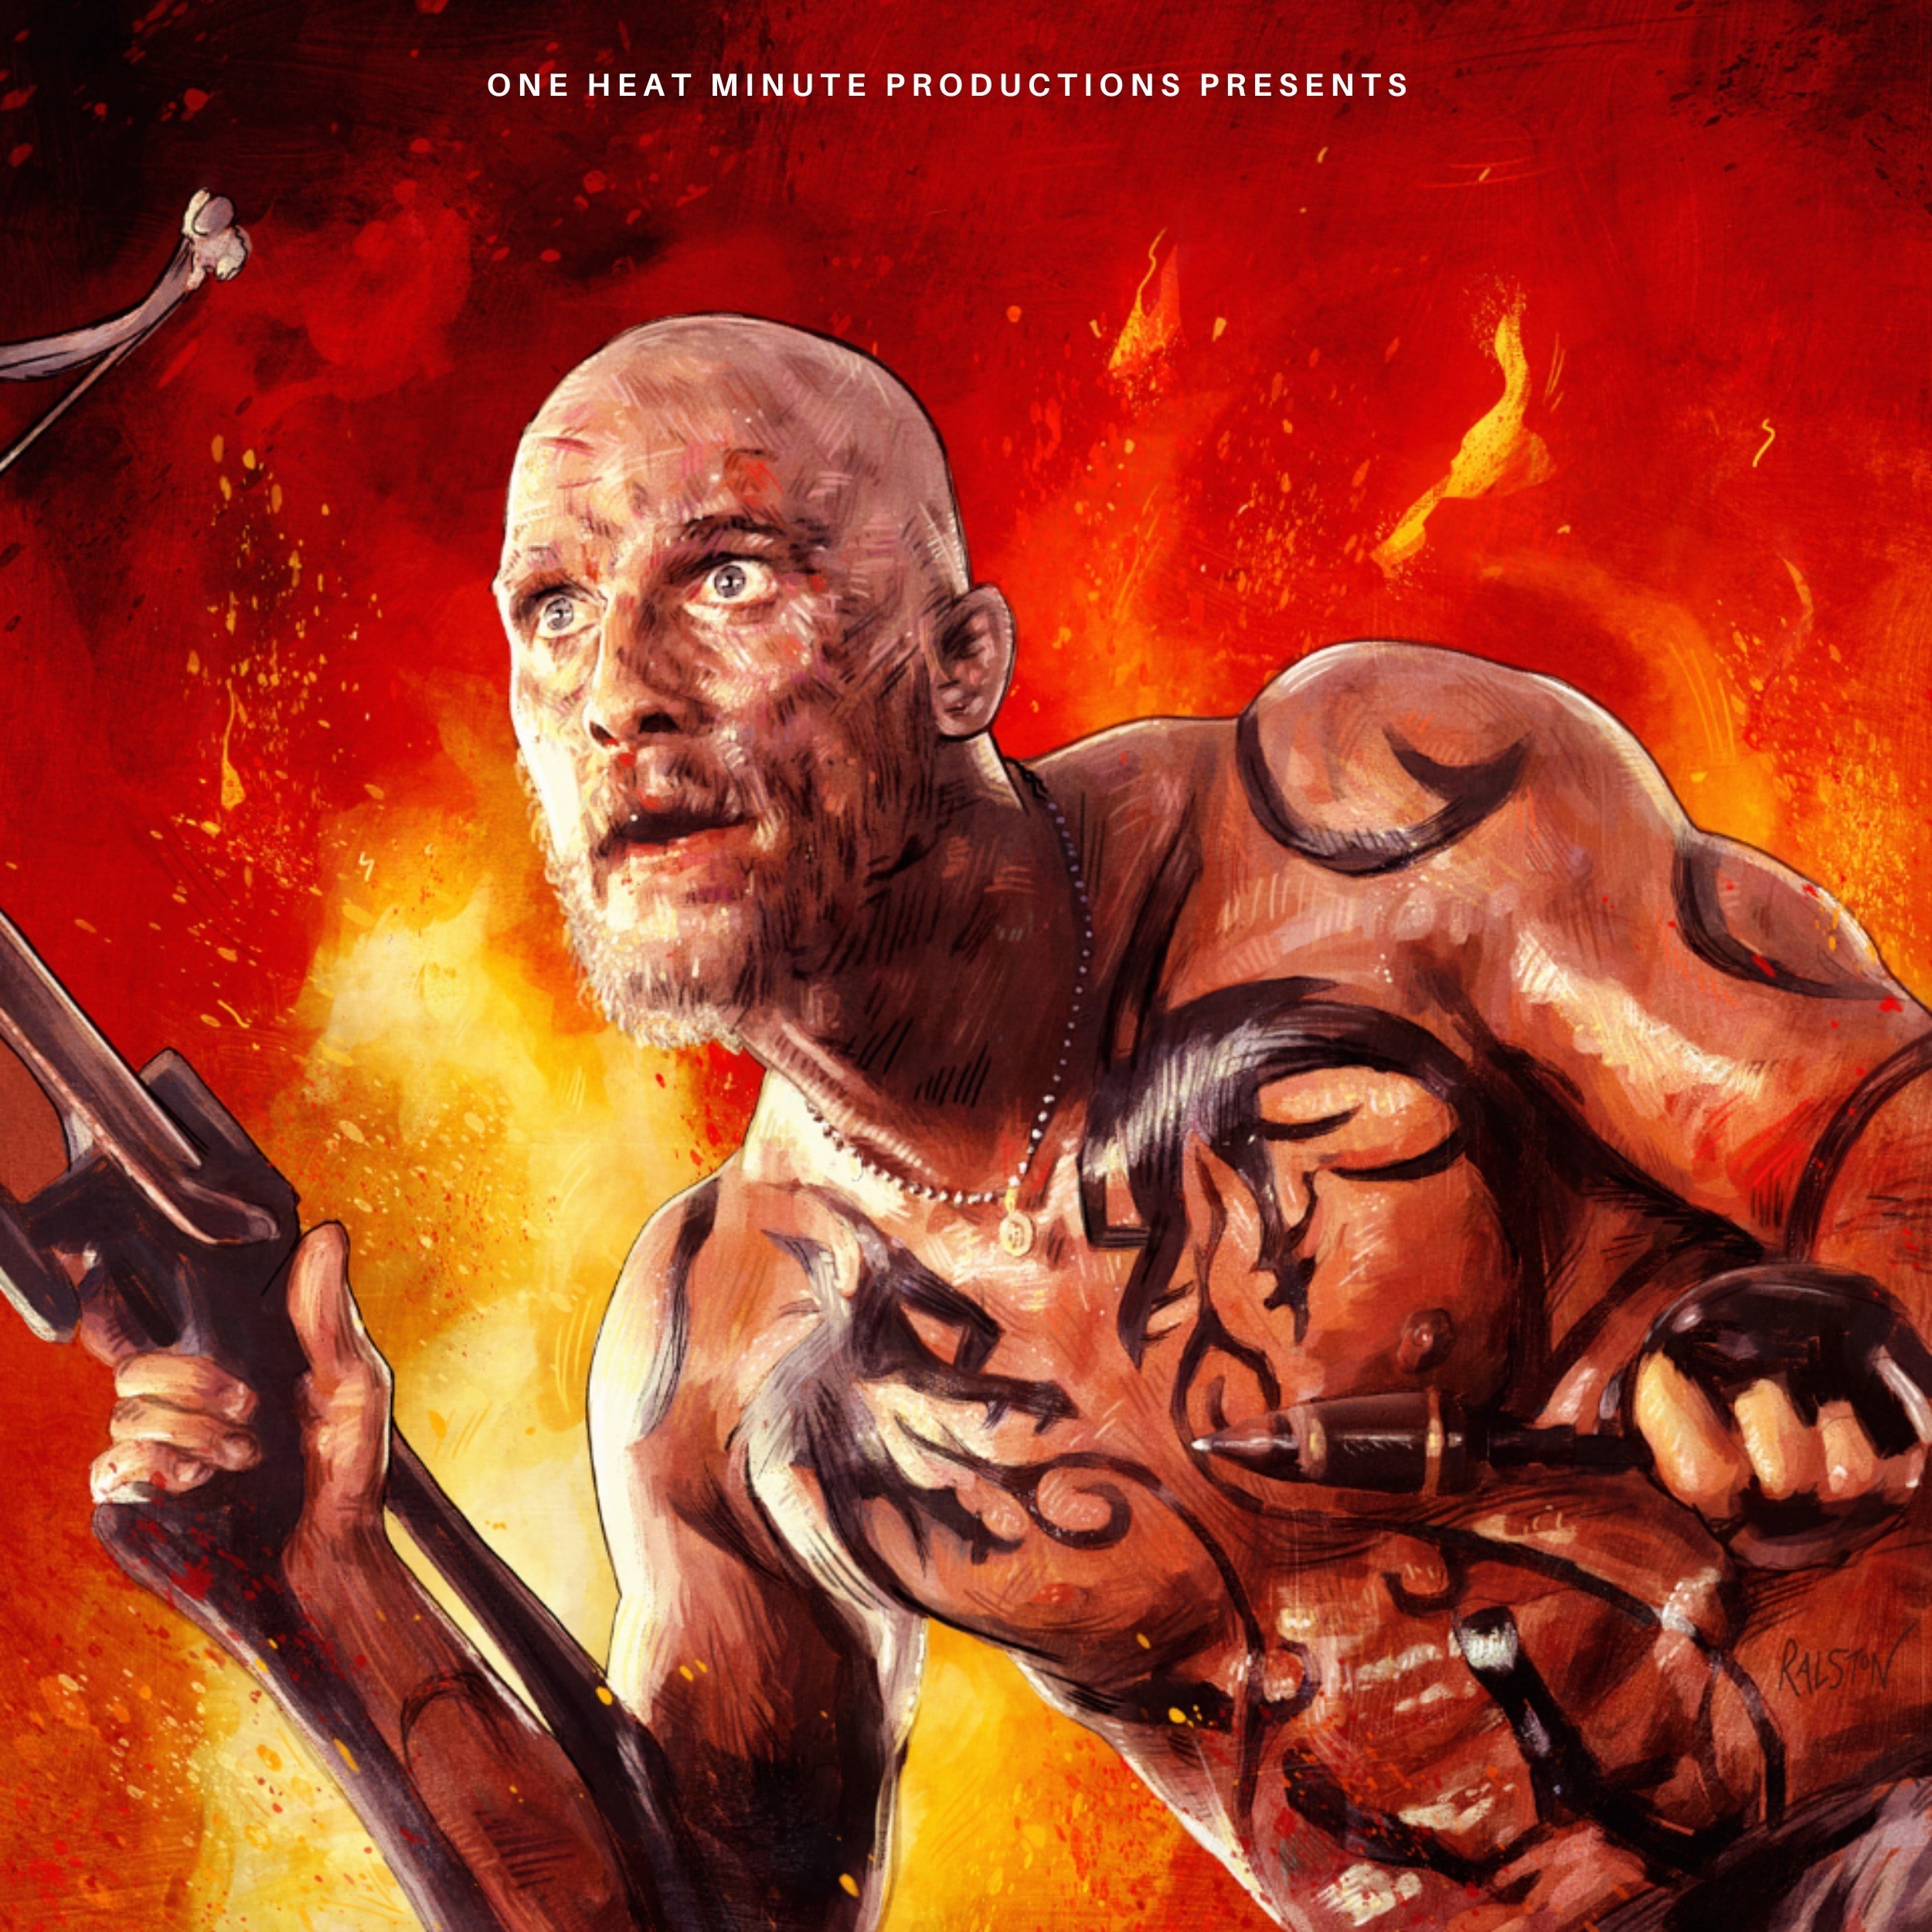 21 Years Of The Dragon Apocalypse: Reign of Fire